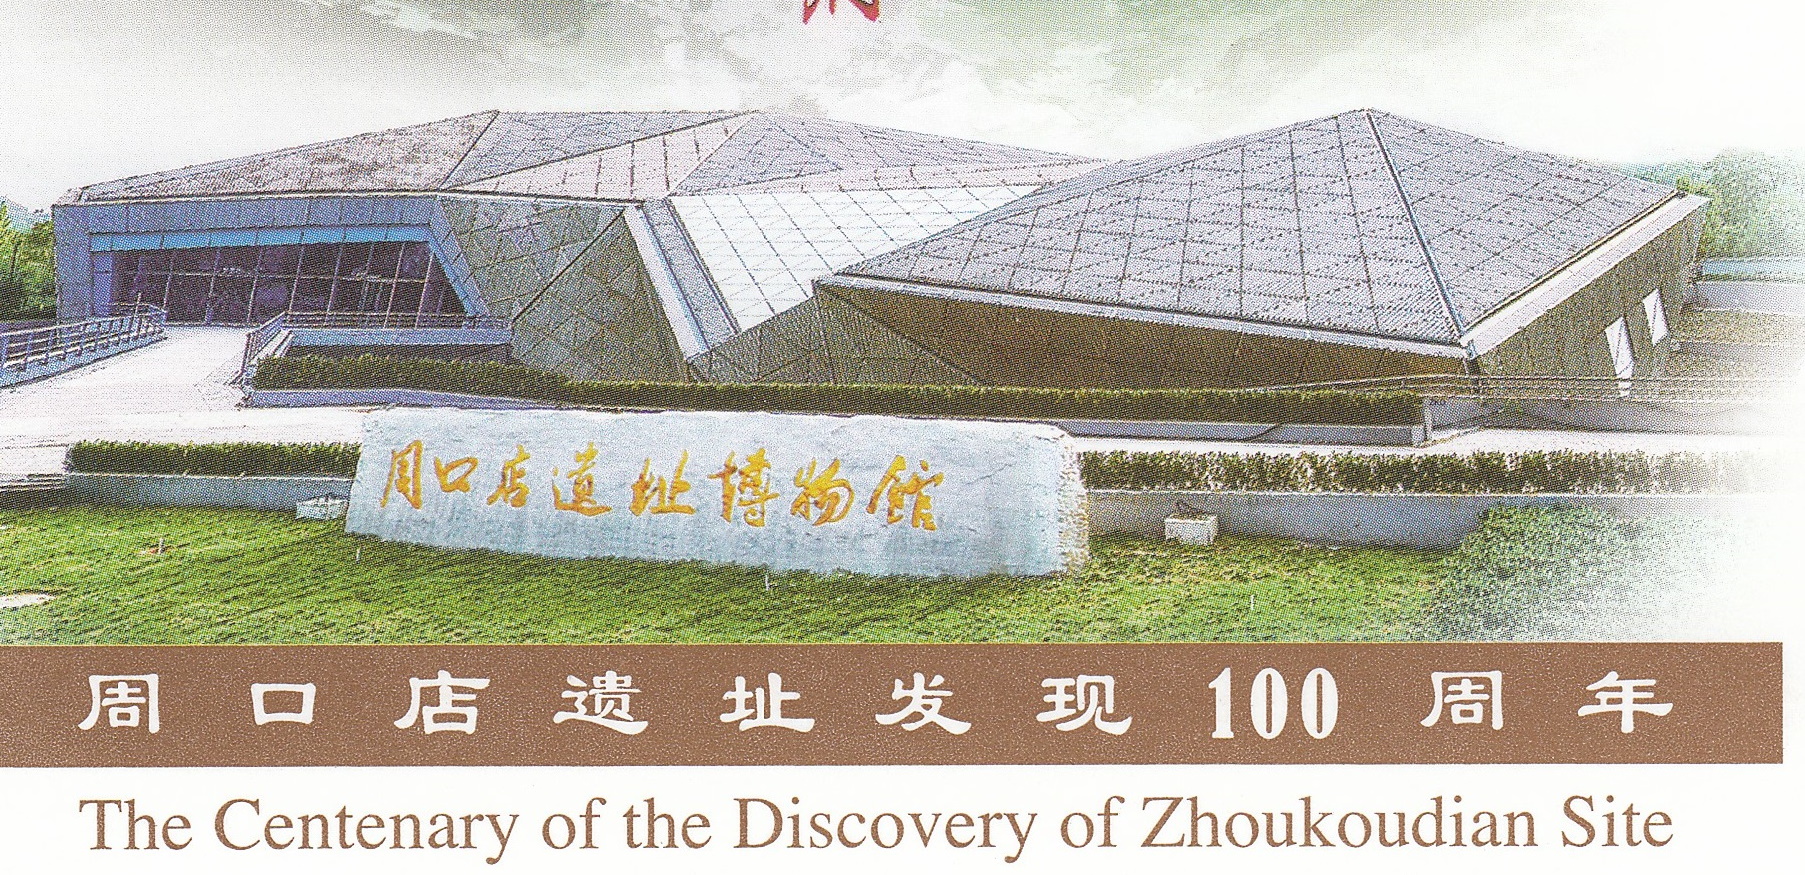 The Zhoukoudian Peking Man Site Museum on cachet of a postal stationery of China 2018